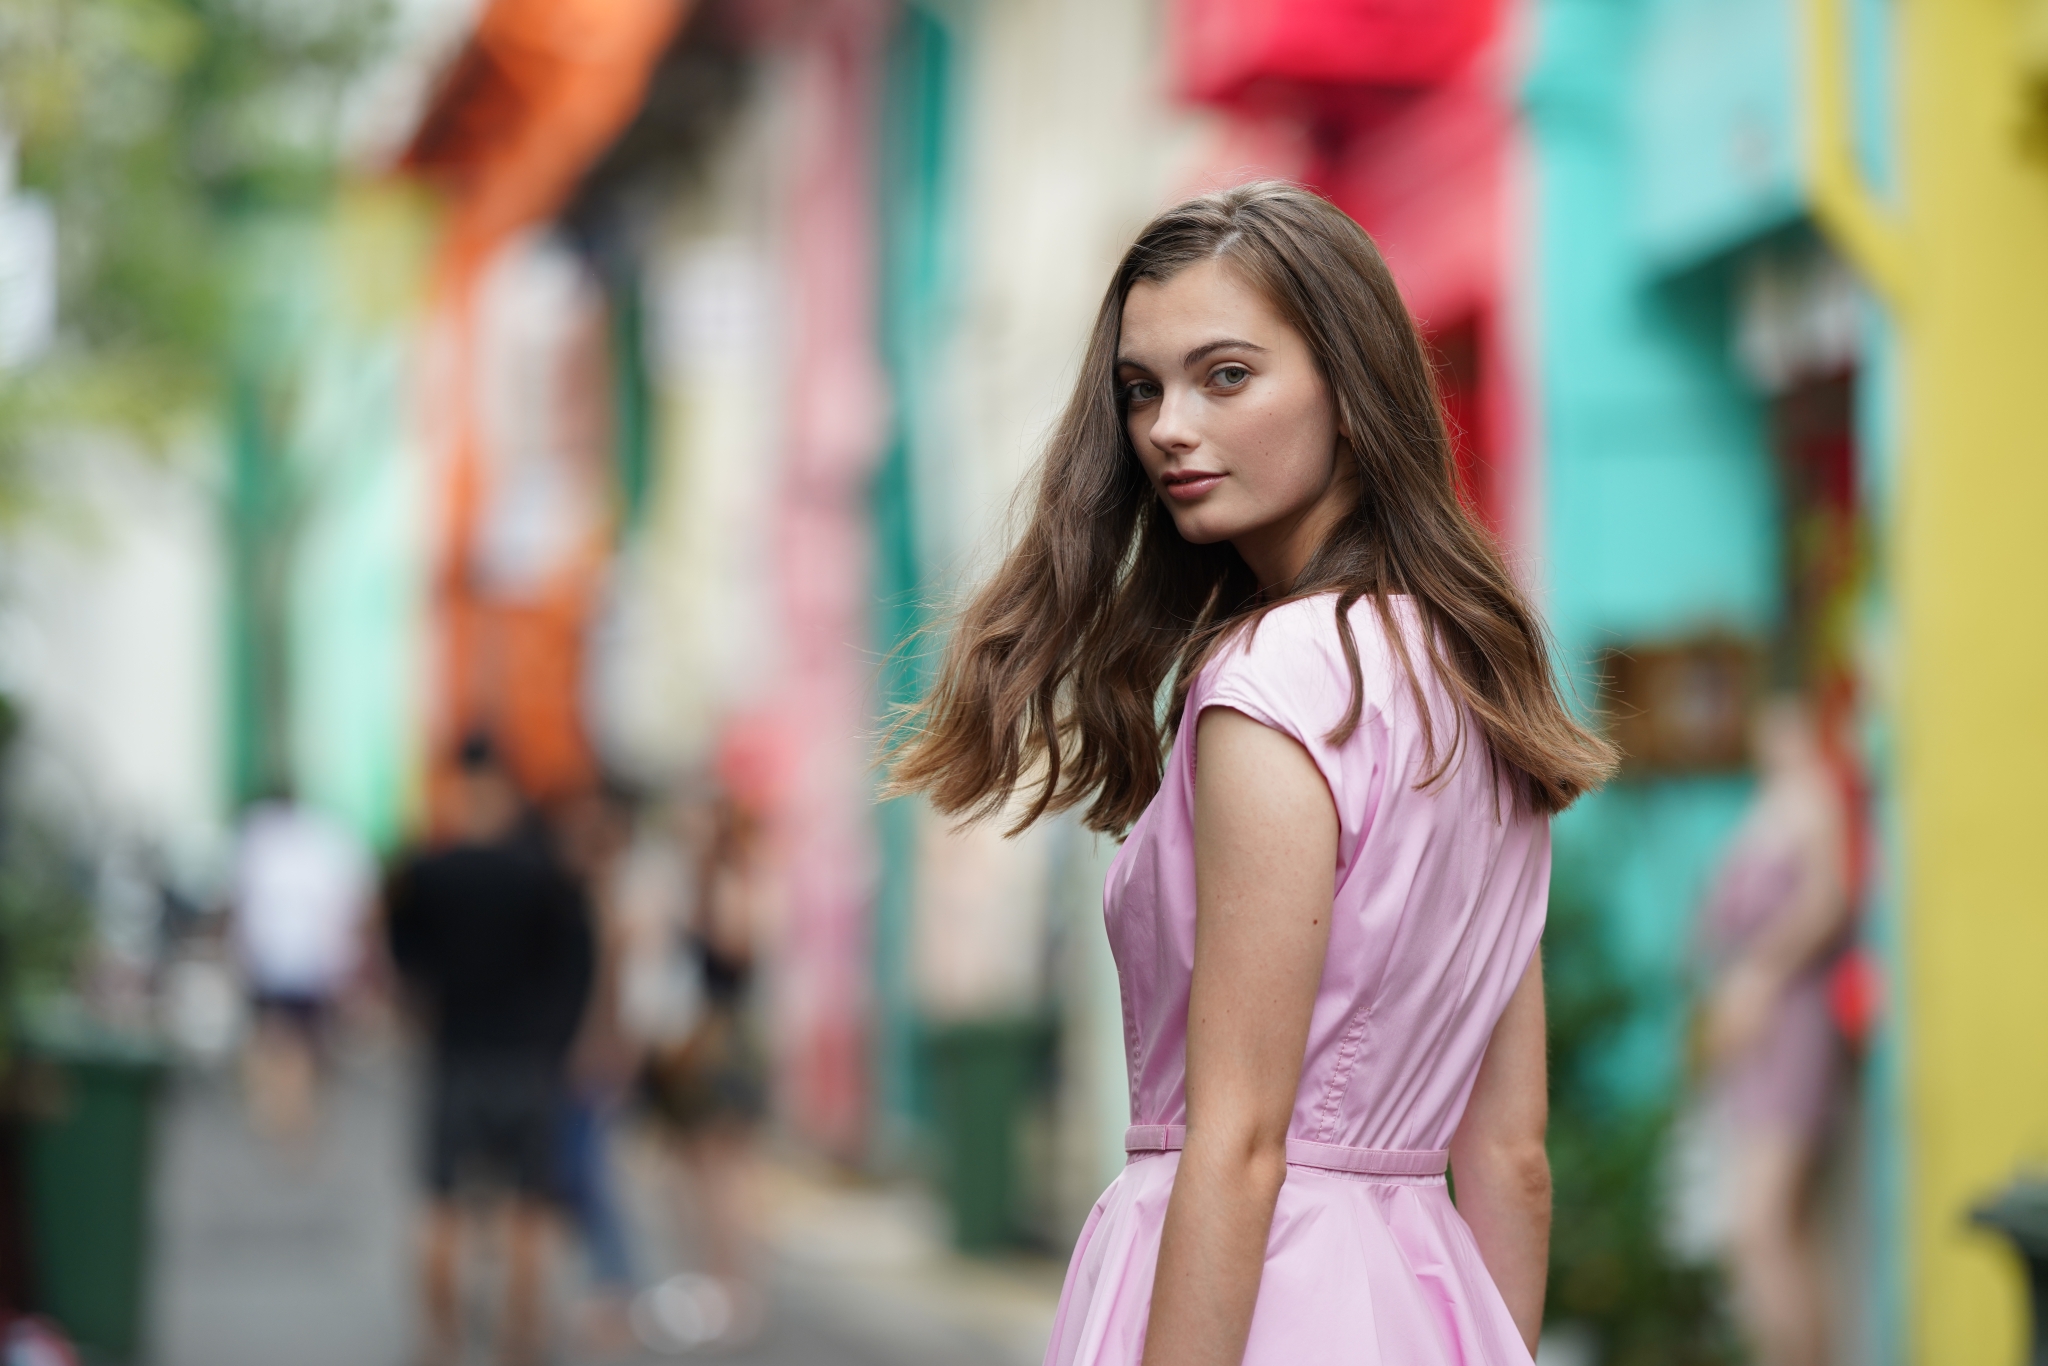 Female model looking over shoulder towards camera with colourful houses in a bokeh background